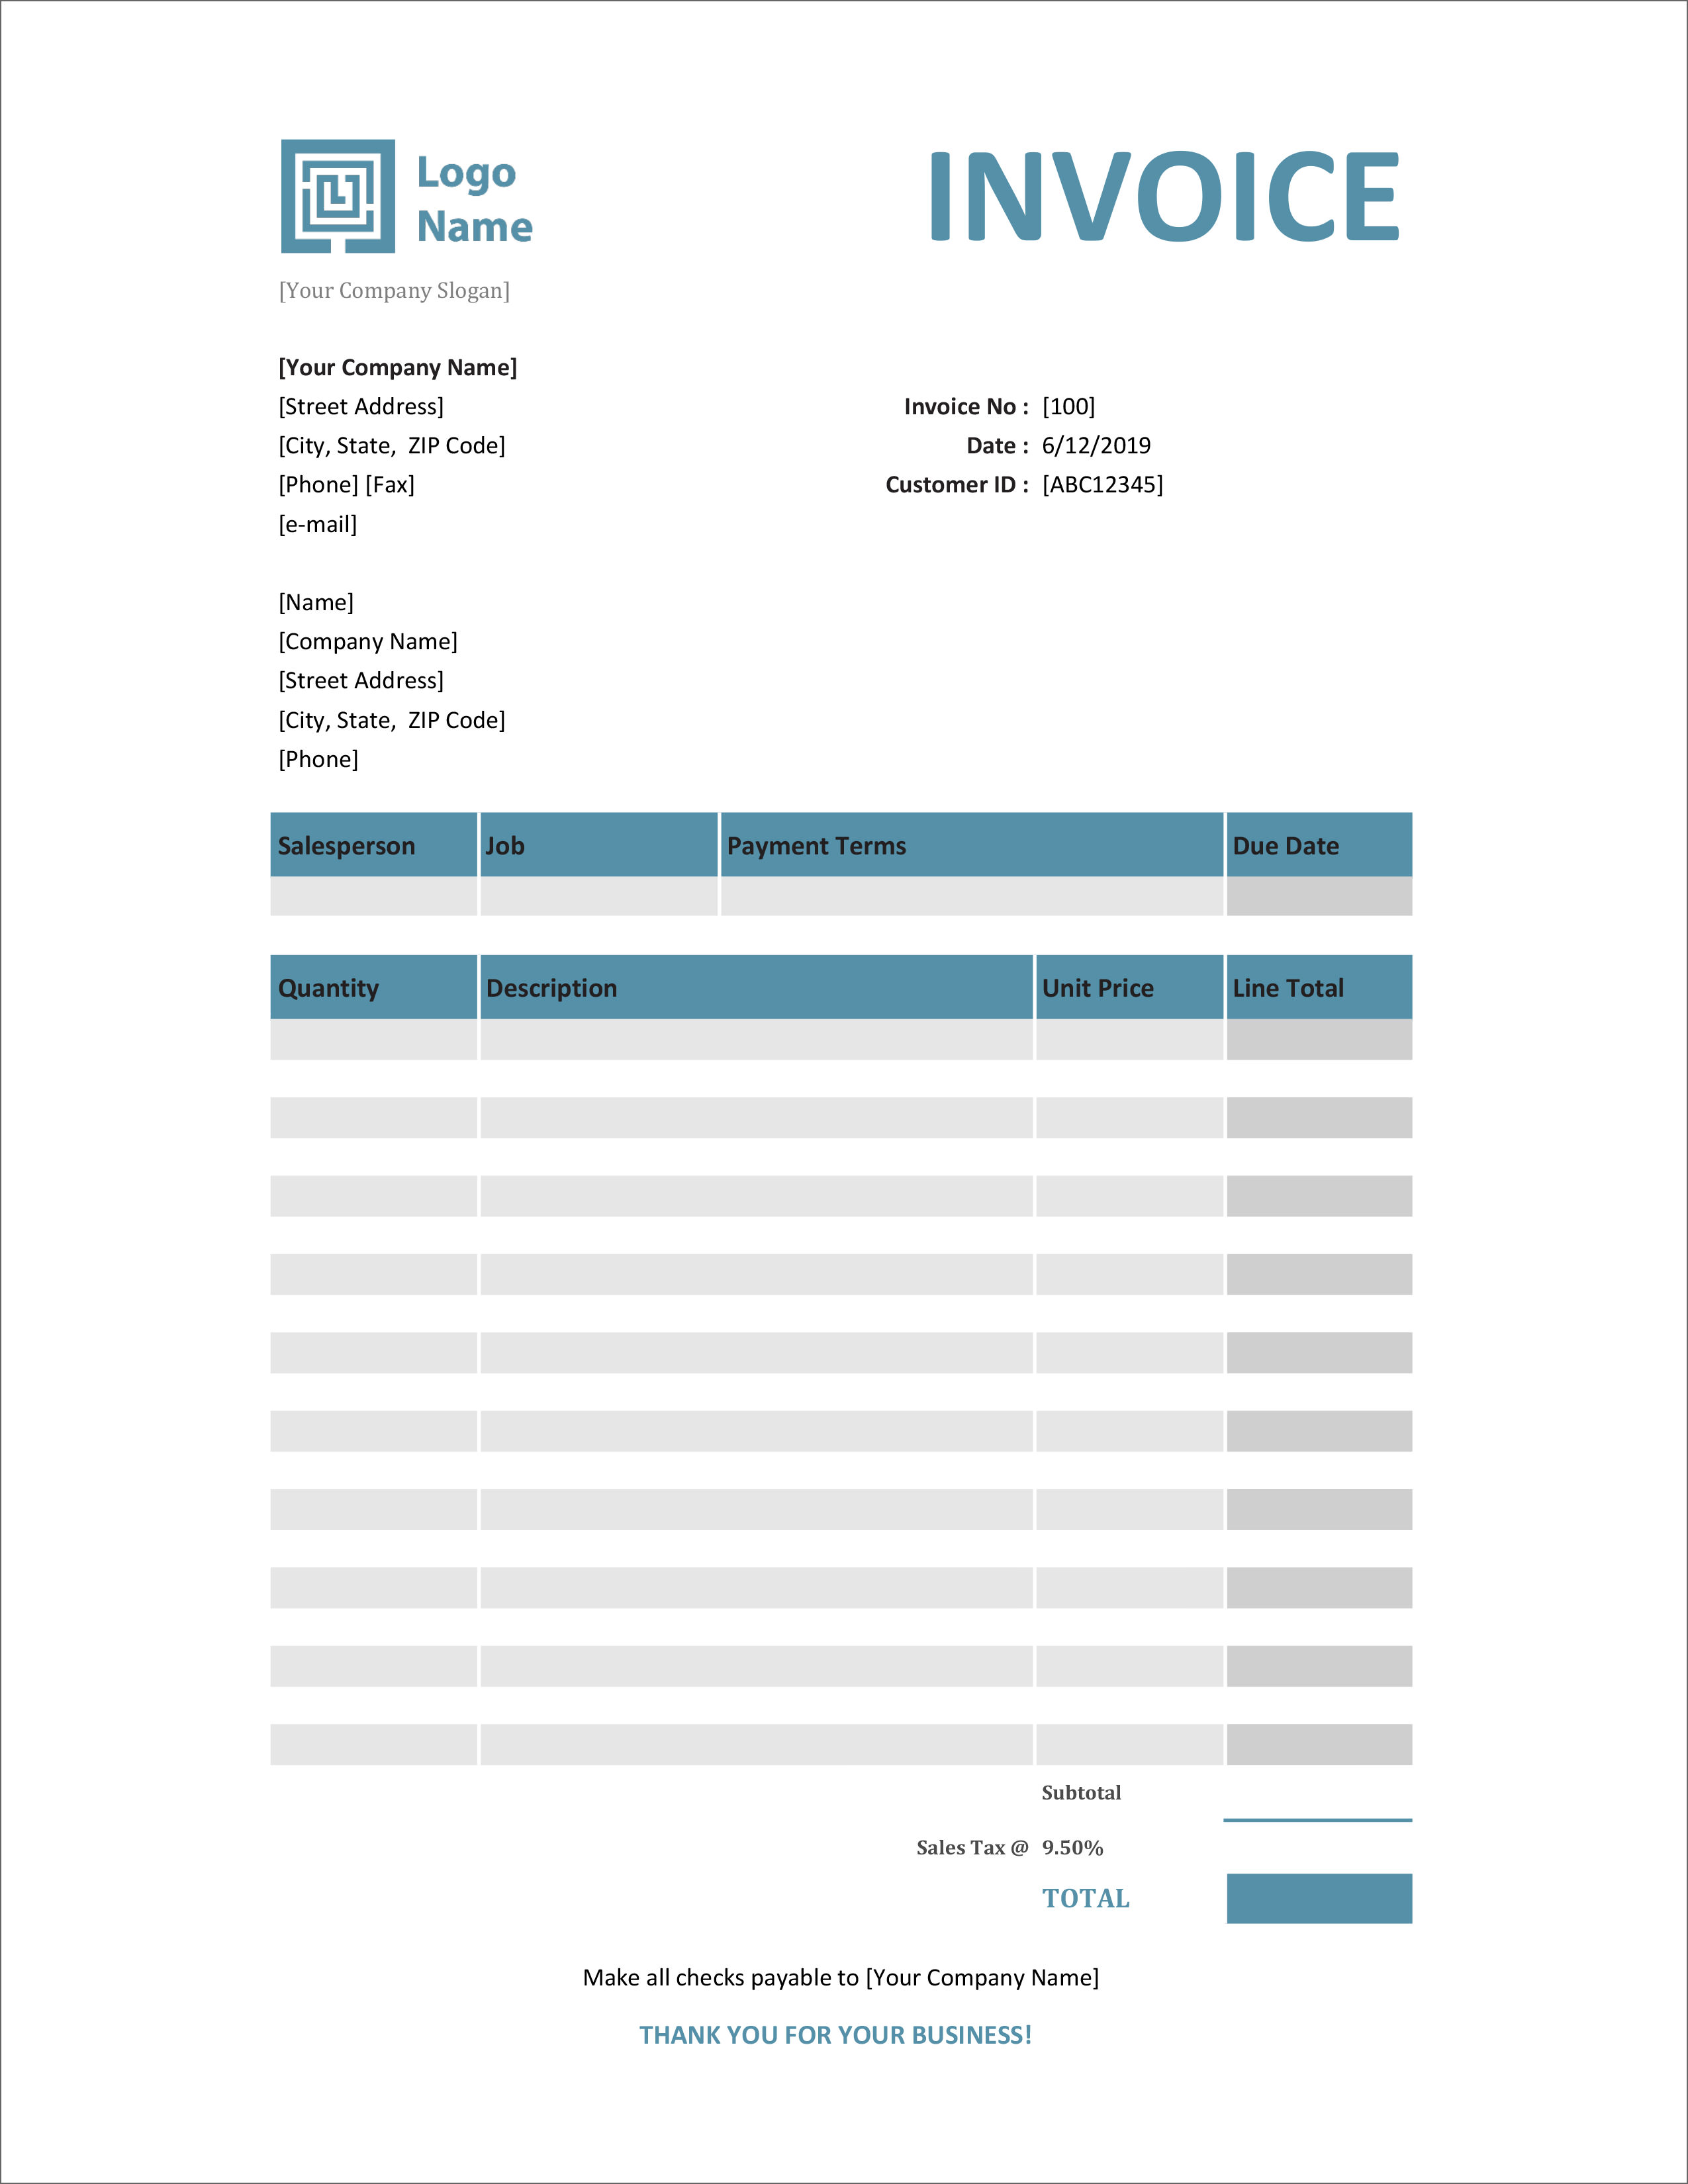 microsoft excel invoice templates free download